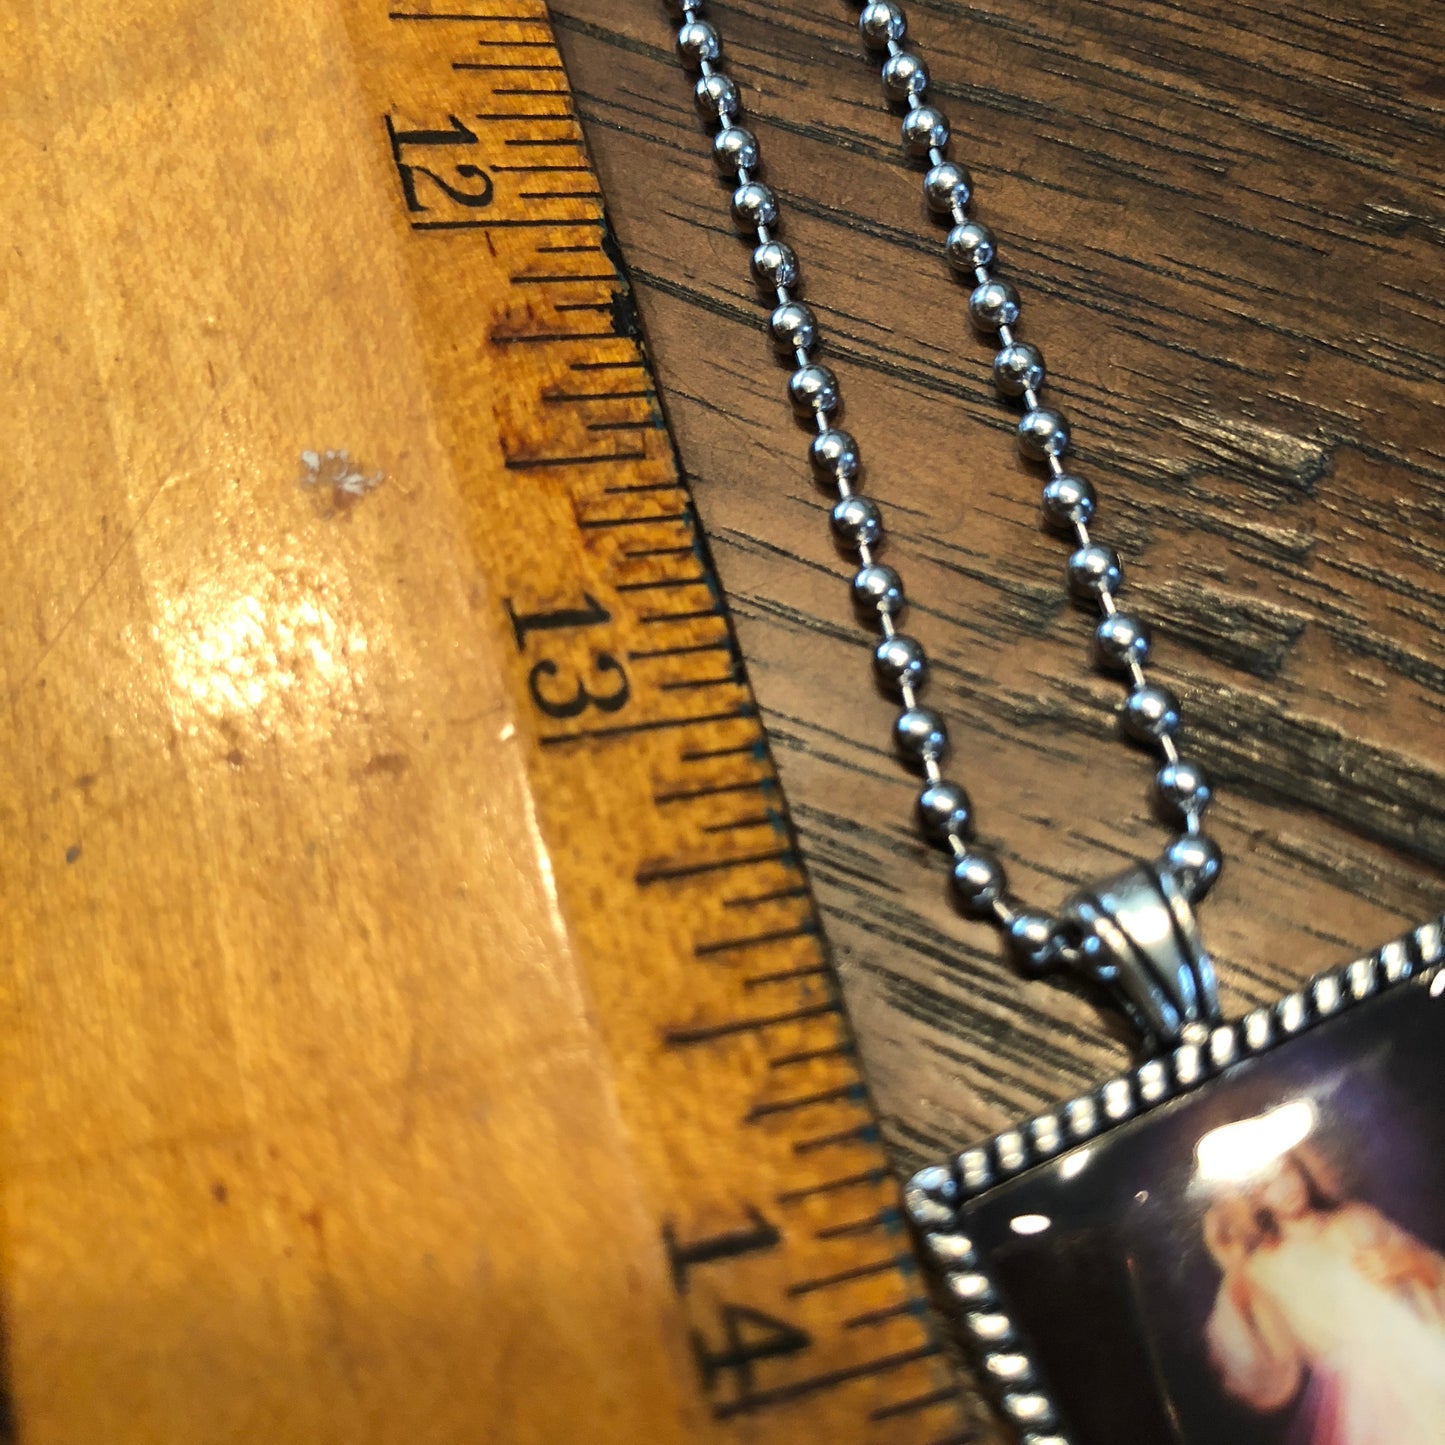 Divine Mercy Ball Chain Necklace